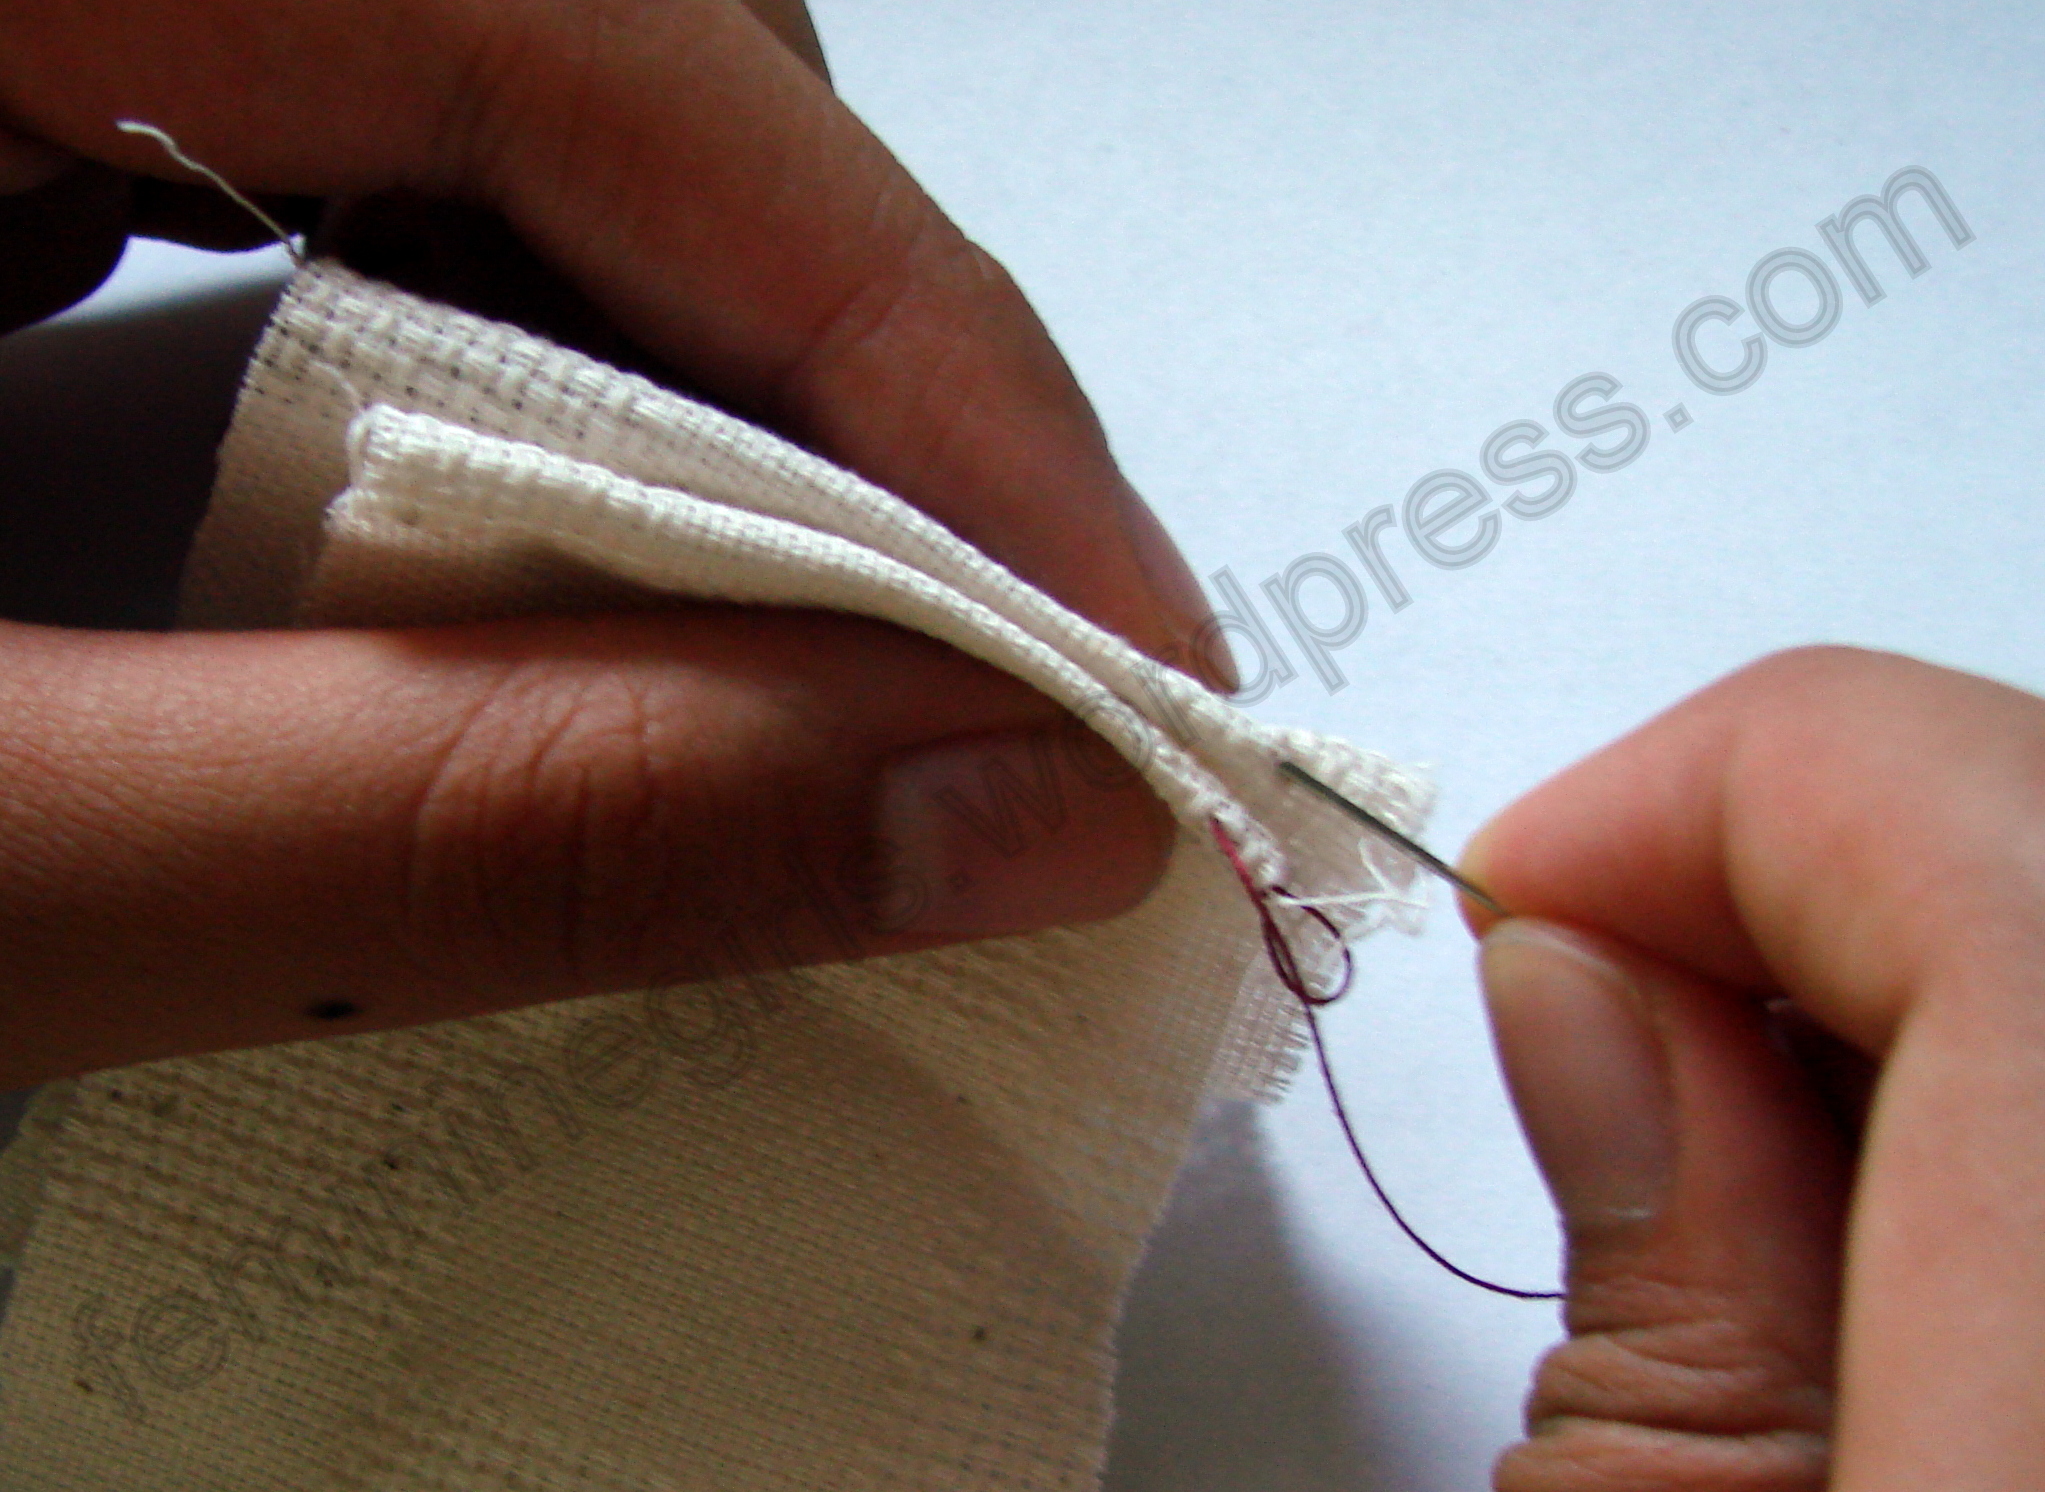 Hand sewing with invisible thread